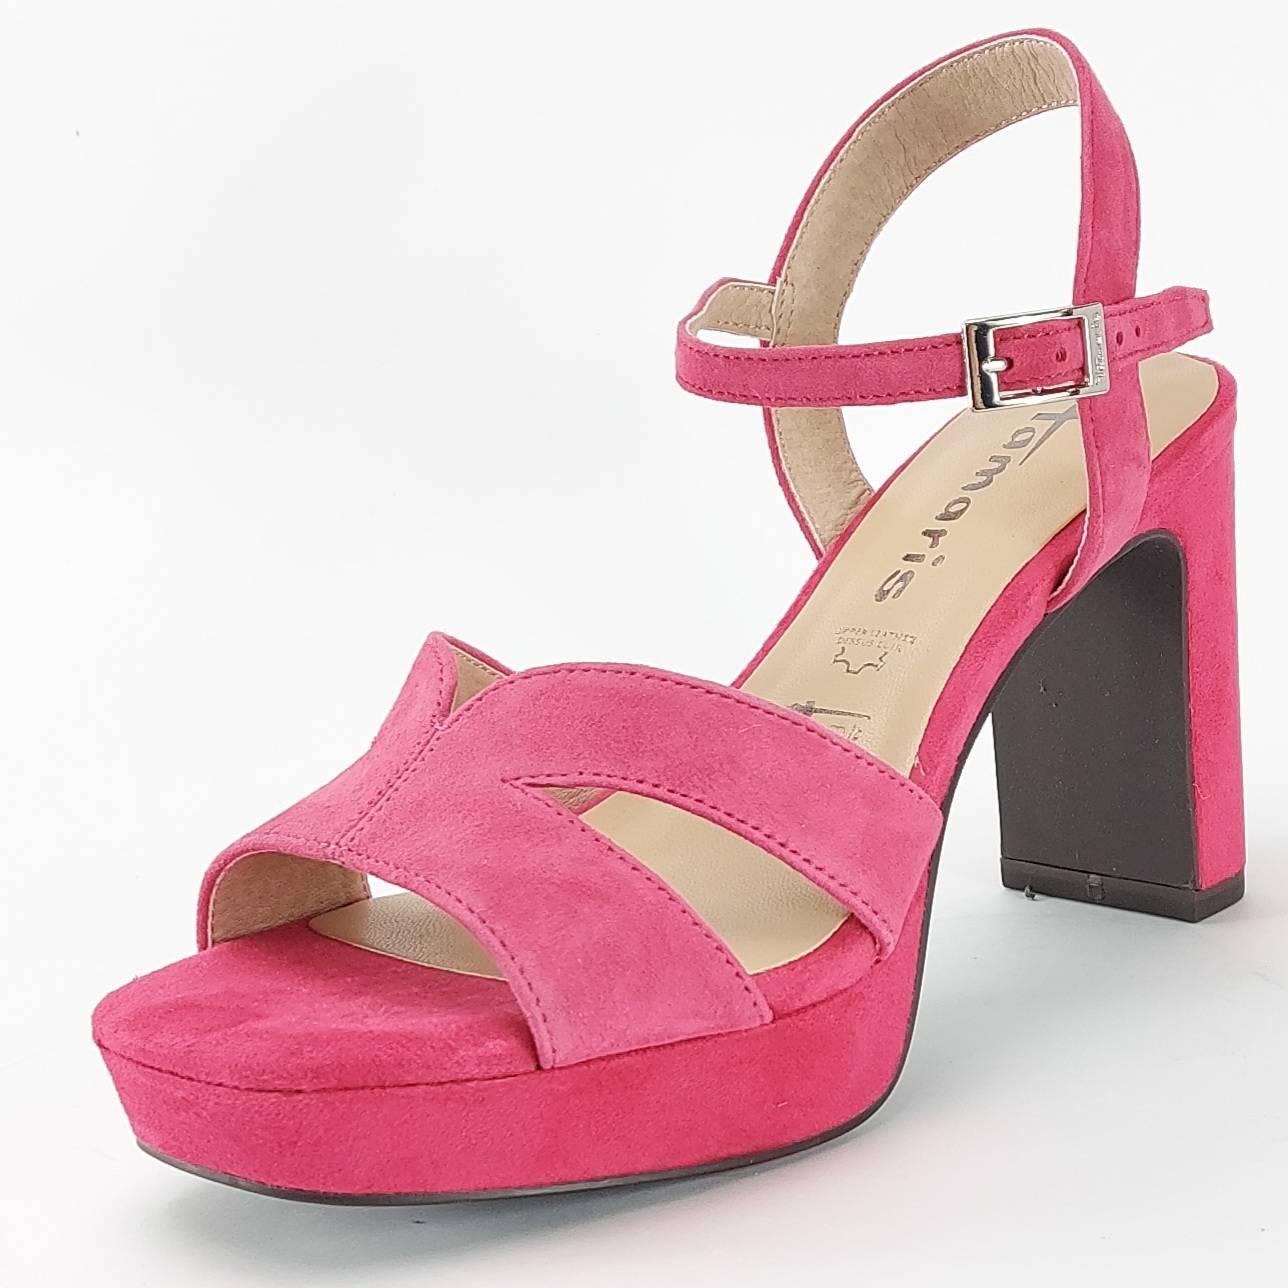 Fasoulis Shoes - Buy online shoes Cyprus Greece